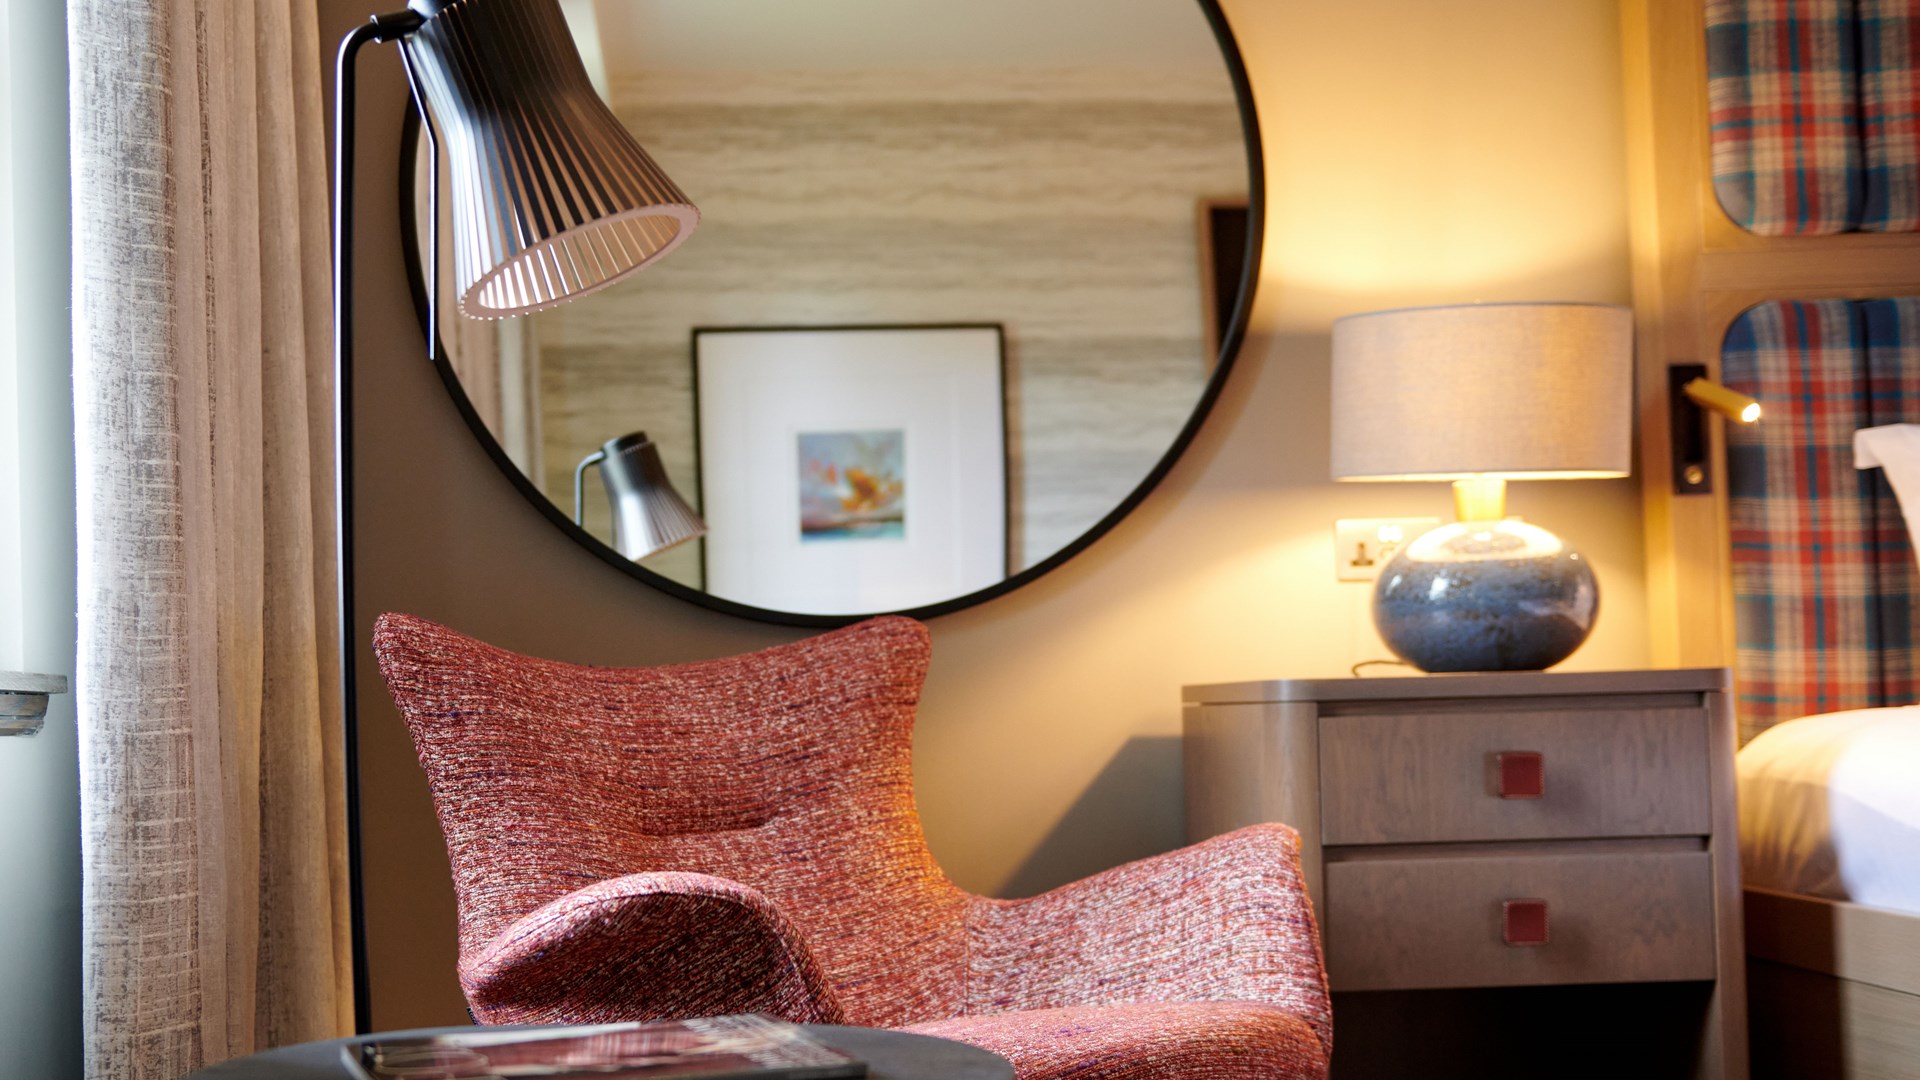 A comfortable hotel room chair with a large mirror above it.